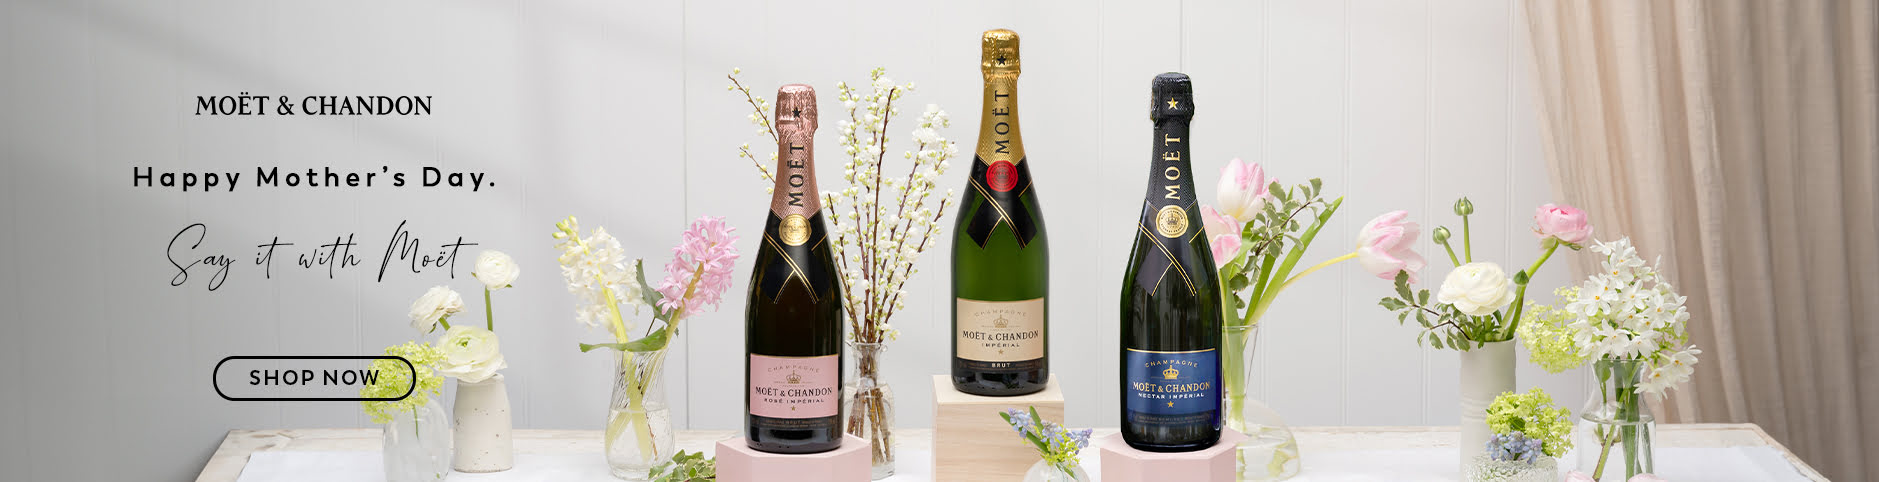 Mother's Day celebration with Moet & Chandon